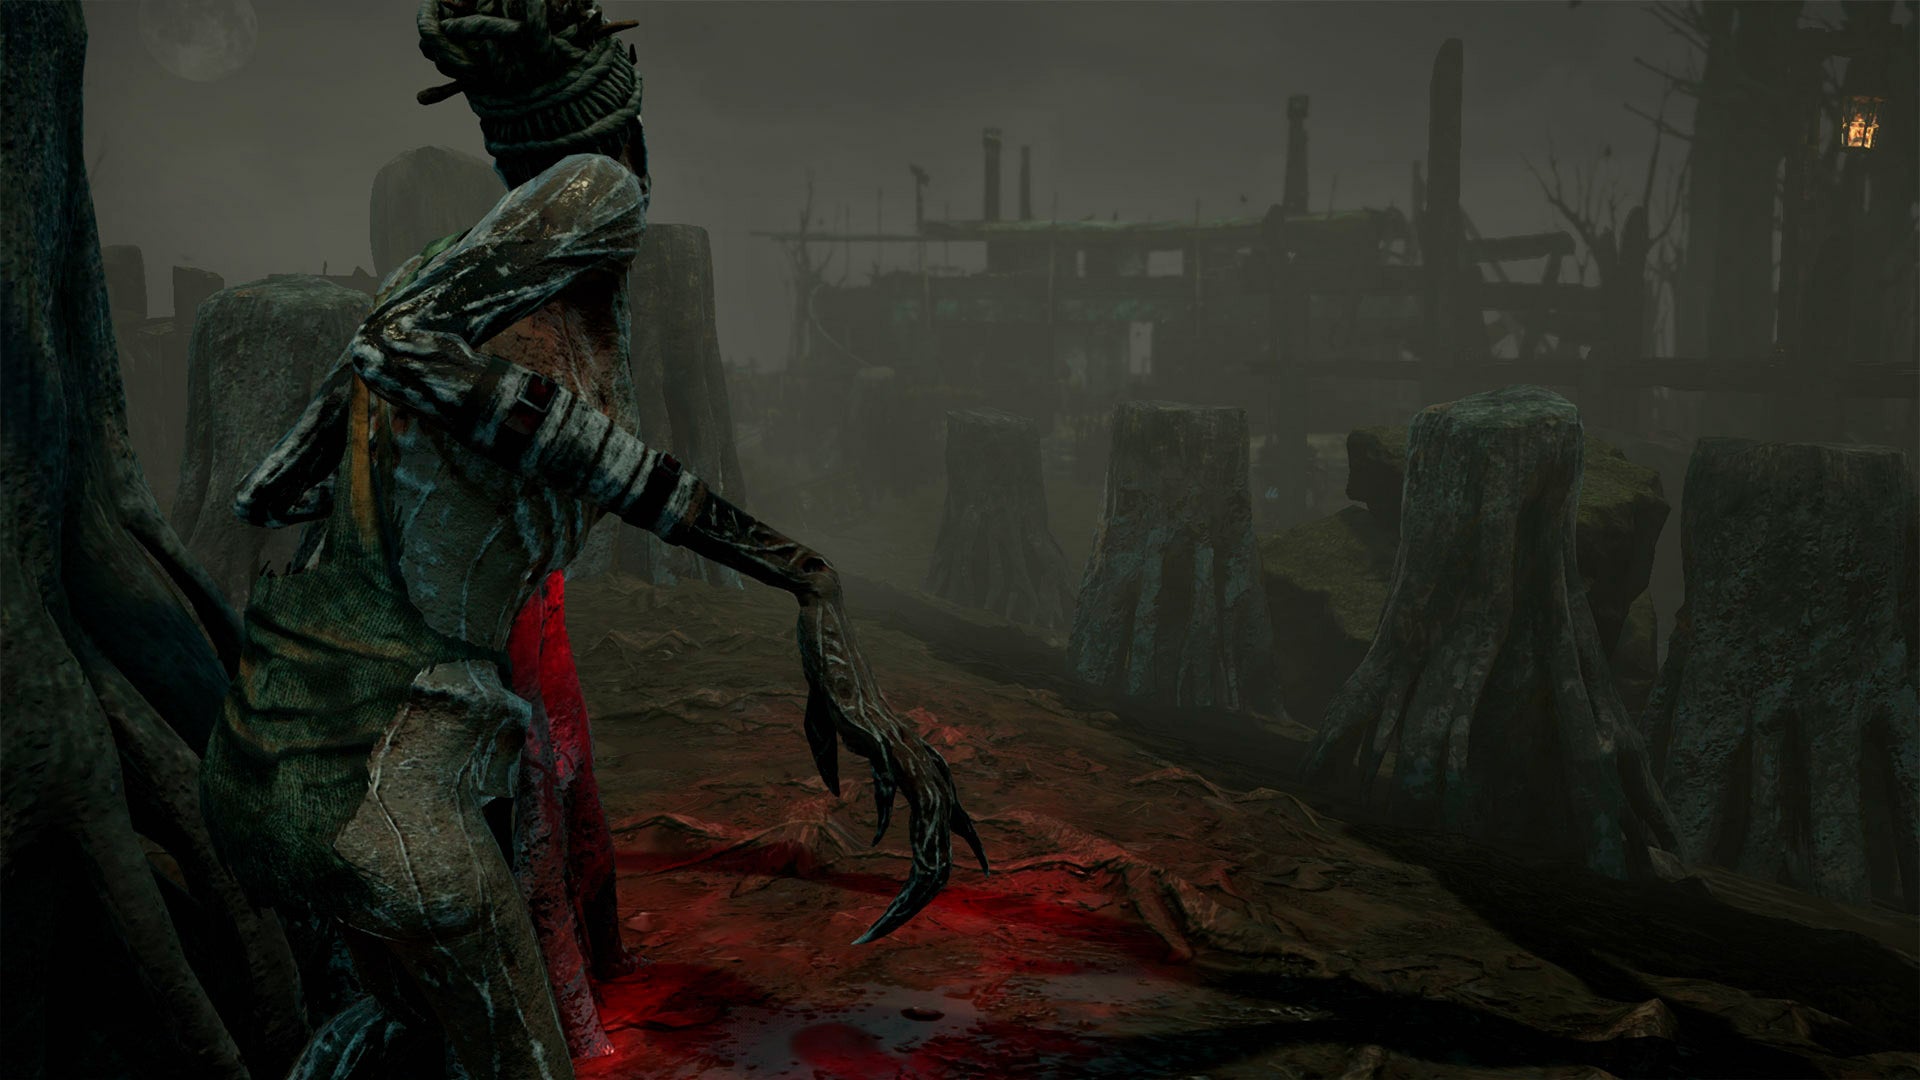 Dead by Daylight - Of Flesh and Mud Chatper DLC